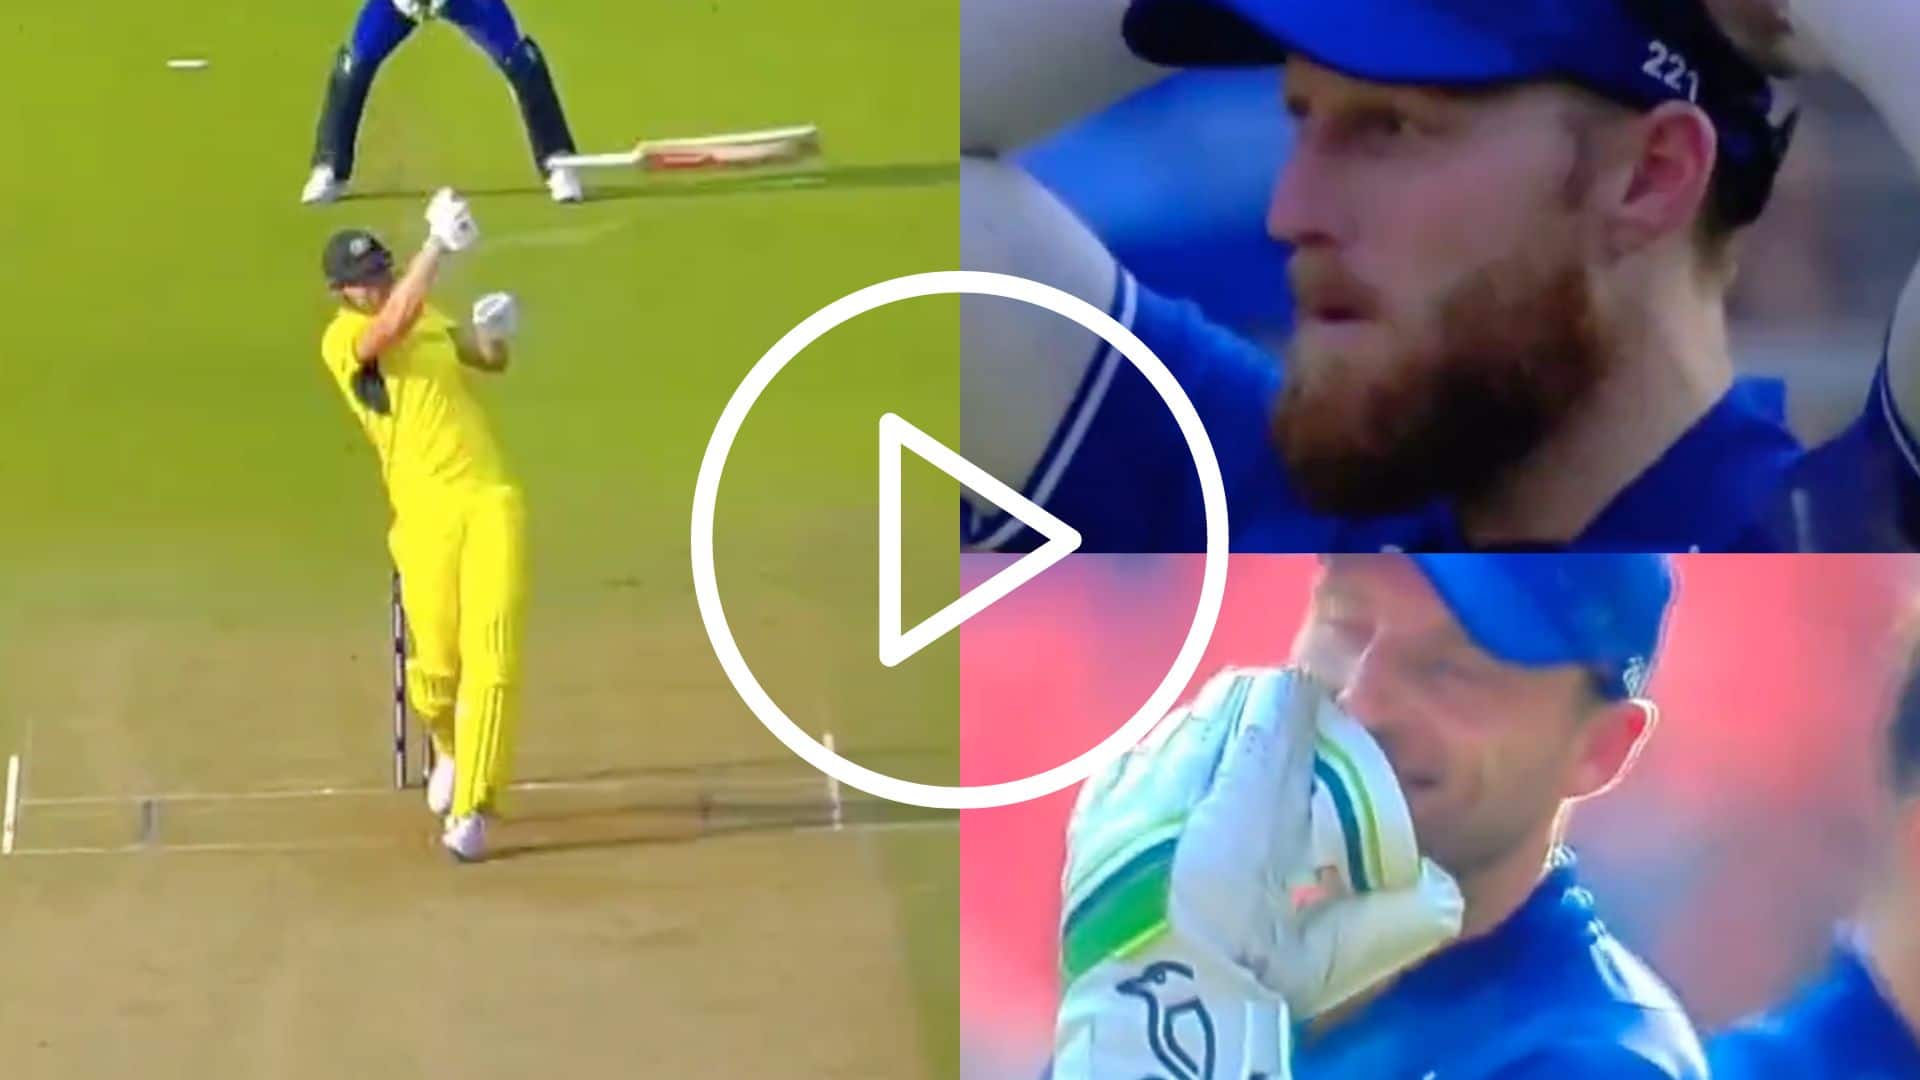 [Watch] Cam Green’s ‘Flying Bat’ Almost Hits Umpire; Stokes Shocked, Buttler In Splits